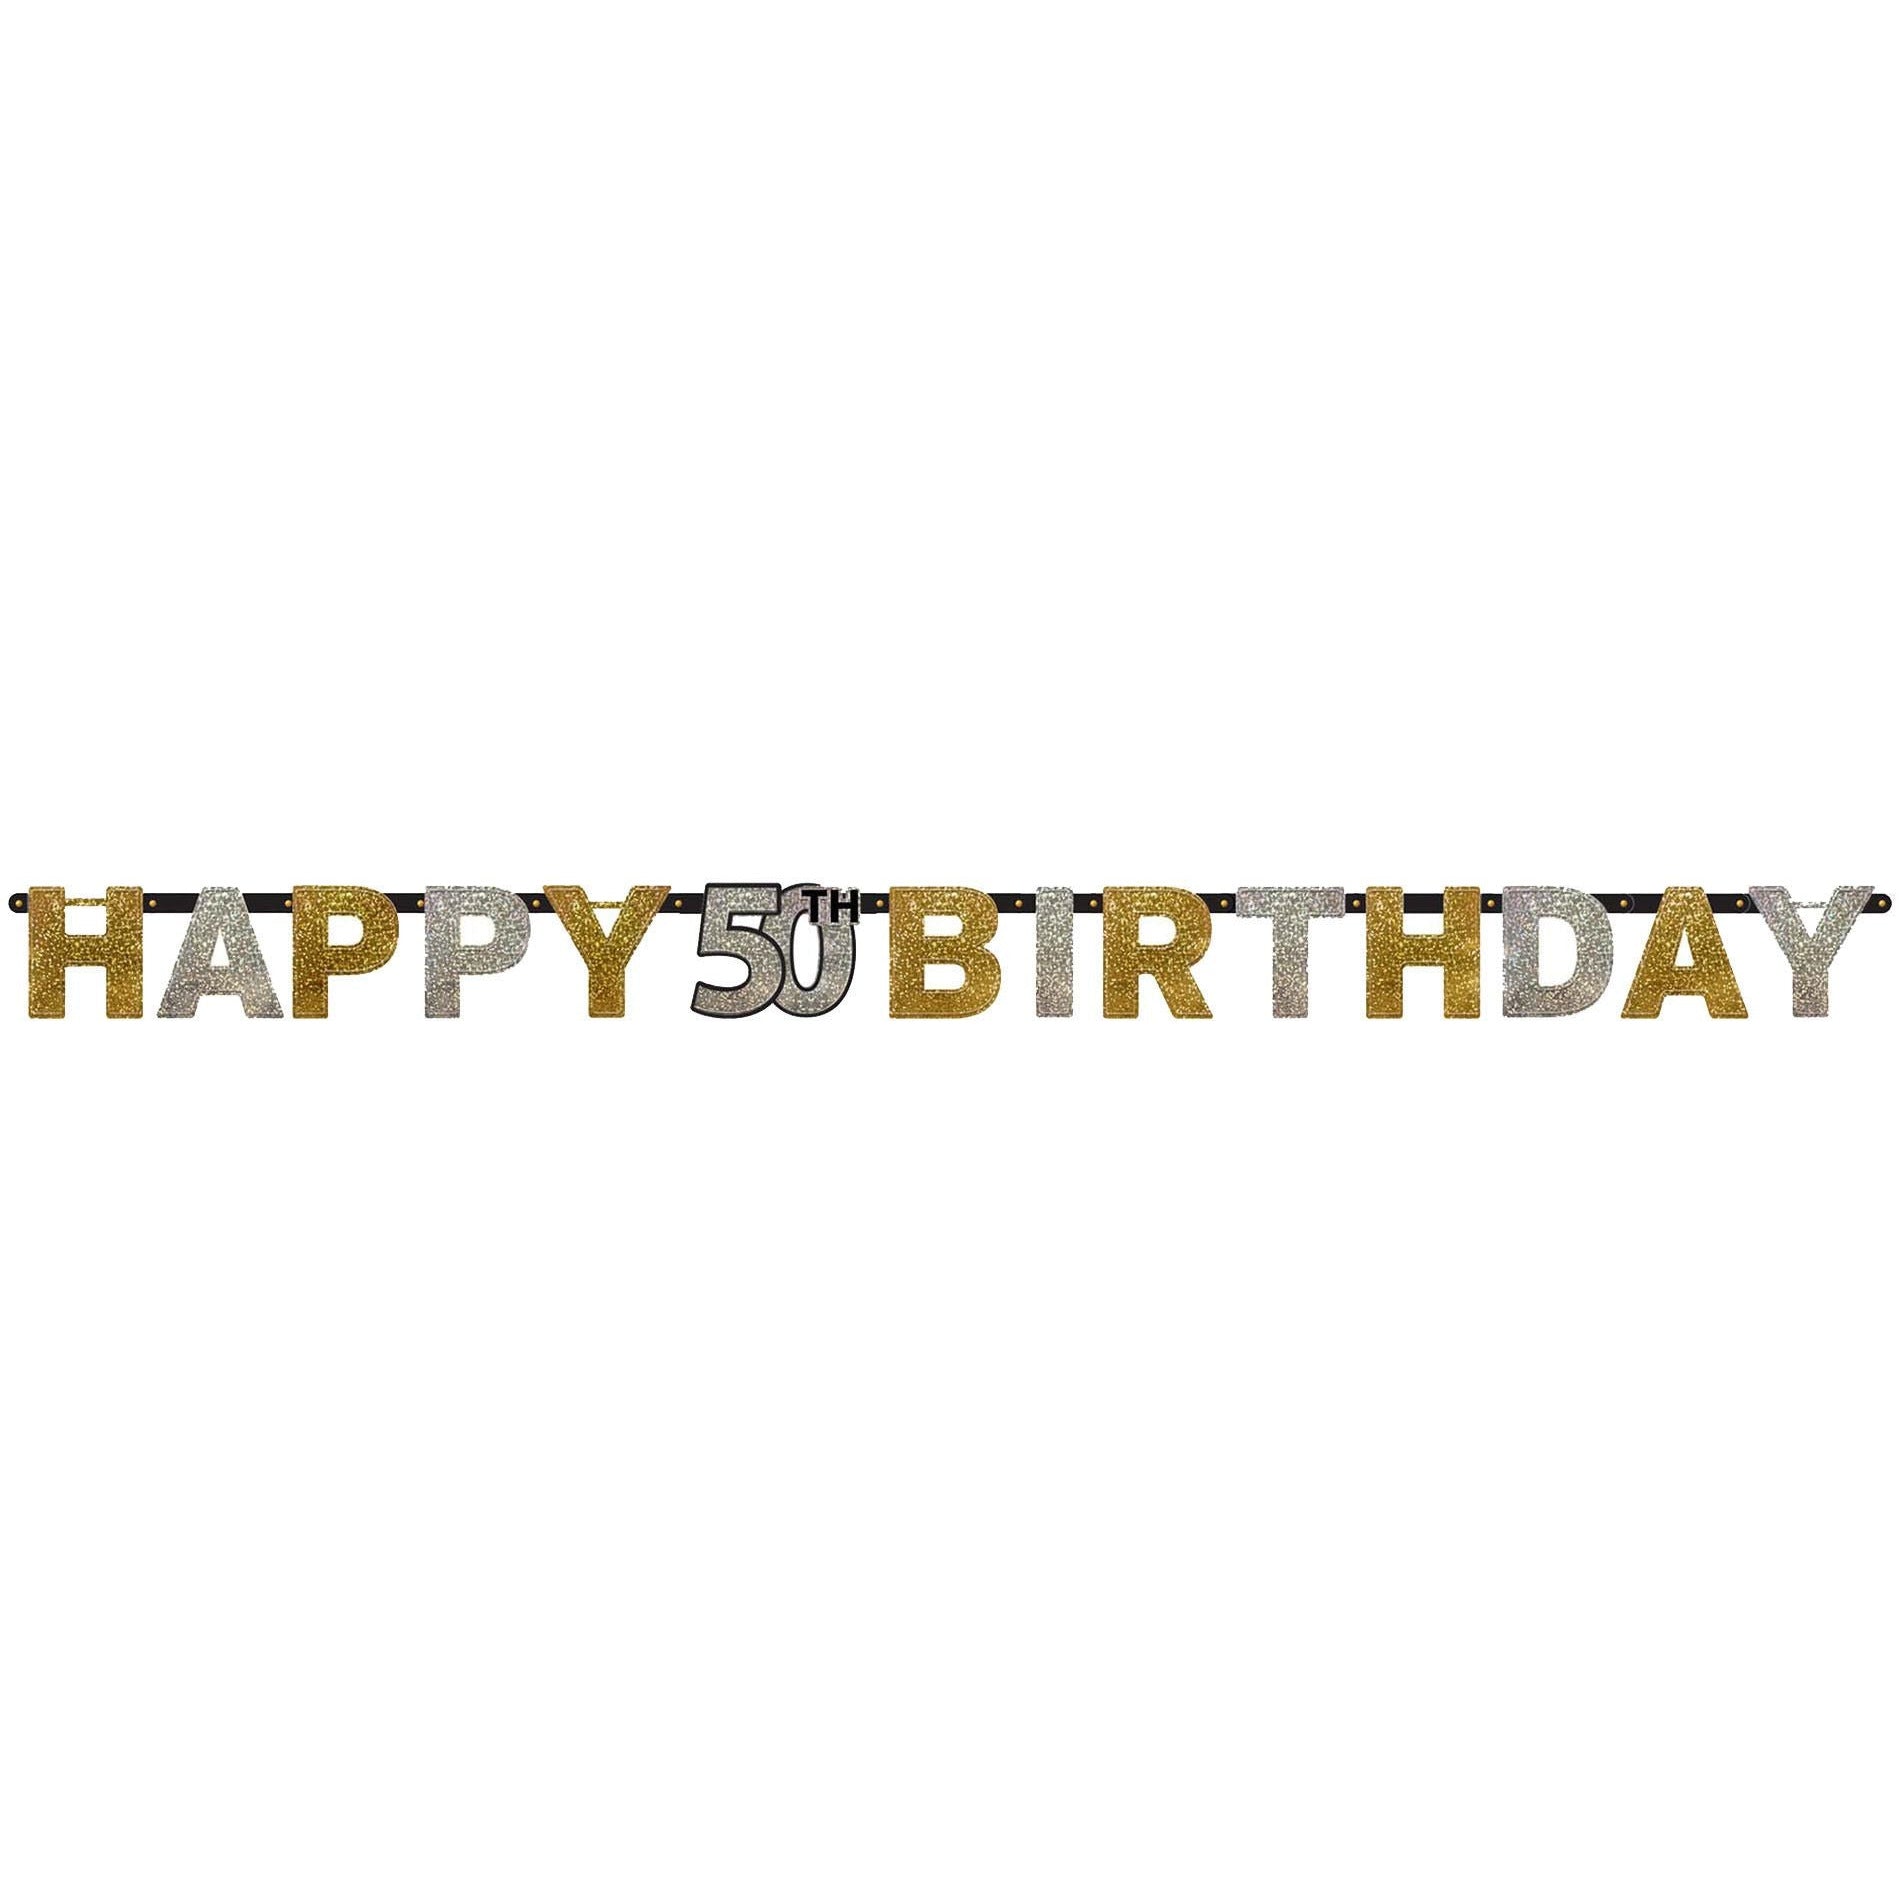 Amscan BIRTHDAY: OVER THE HILL 50th PRISMATIC LETTER BANNER